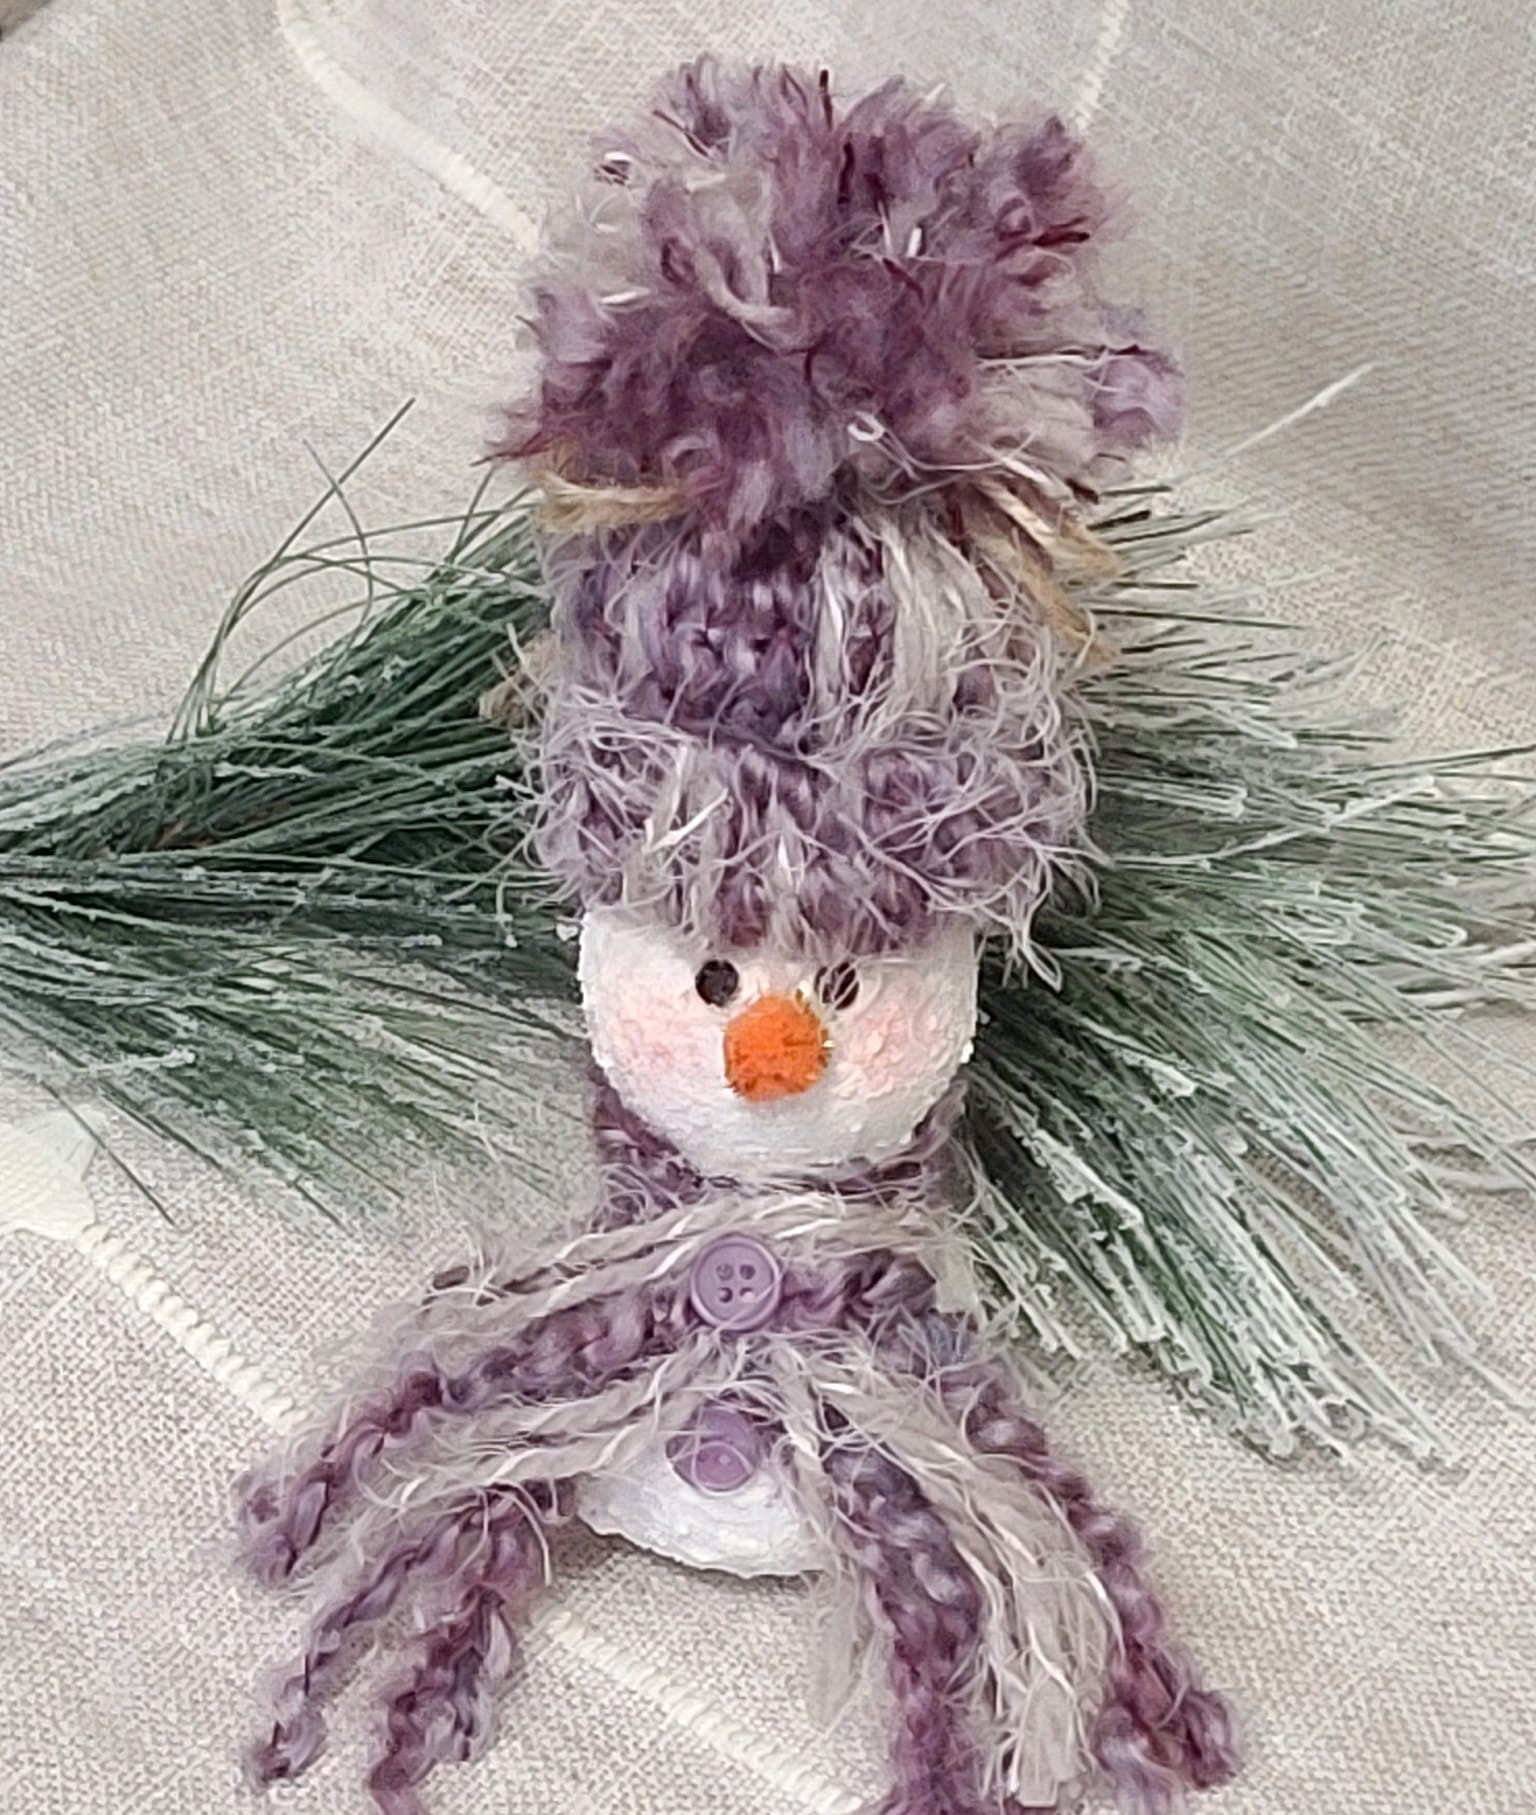 Handpainted gourd snowman ornament with knit hat - purple/white